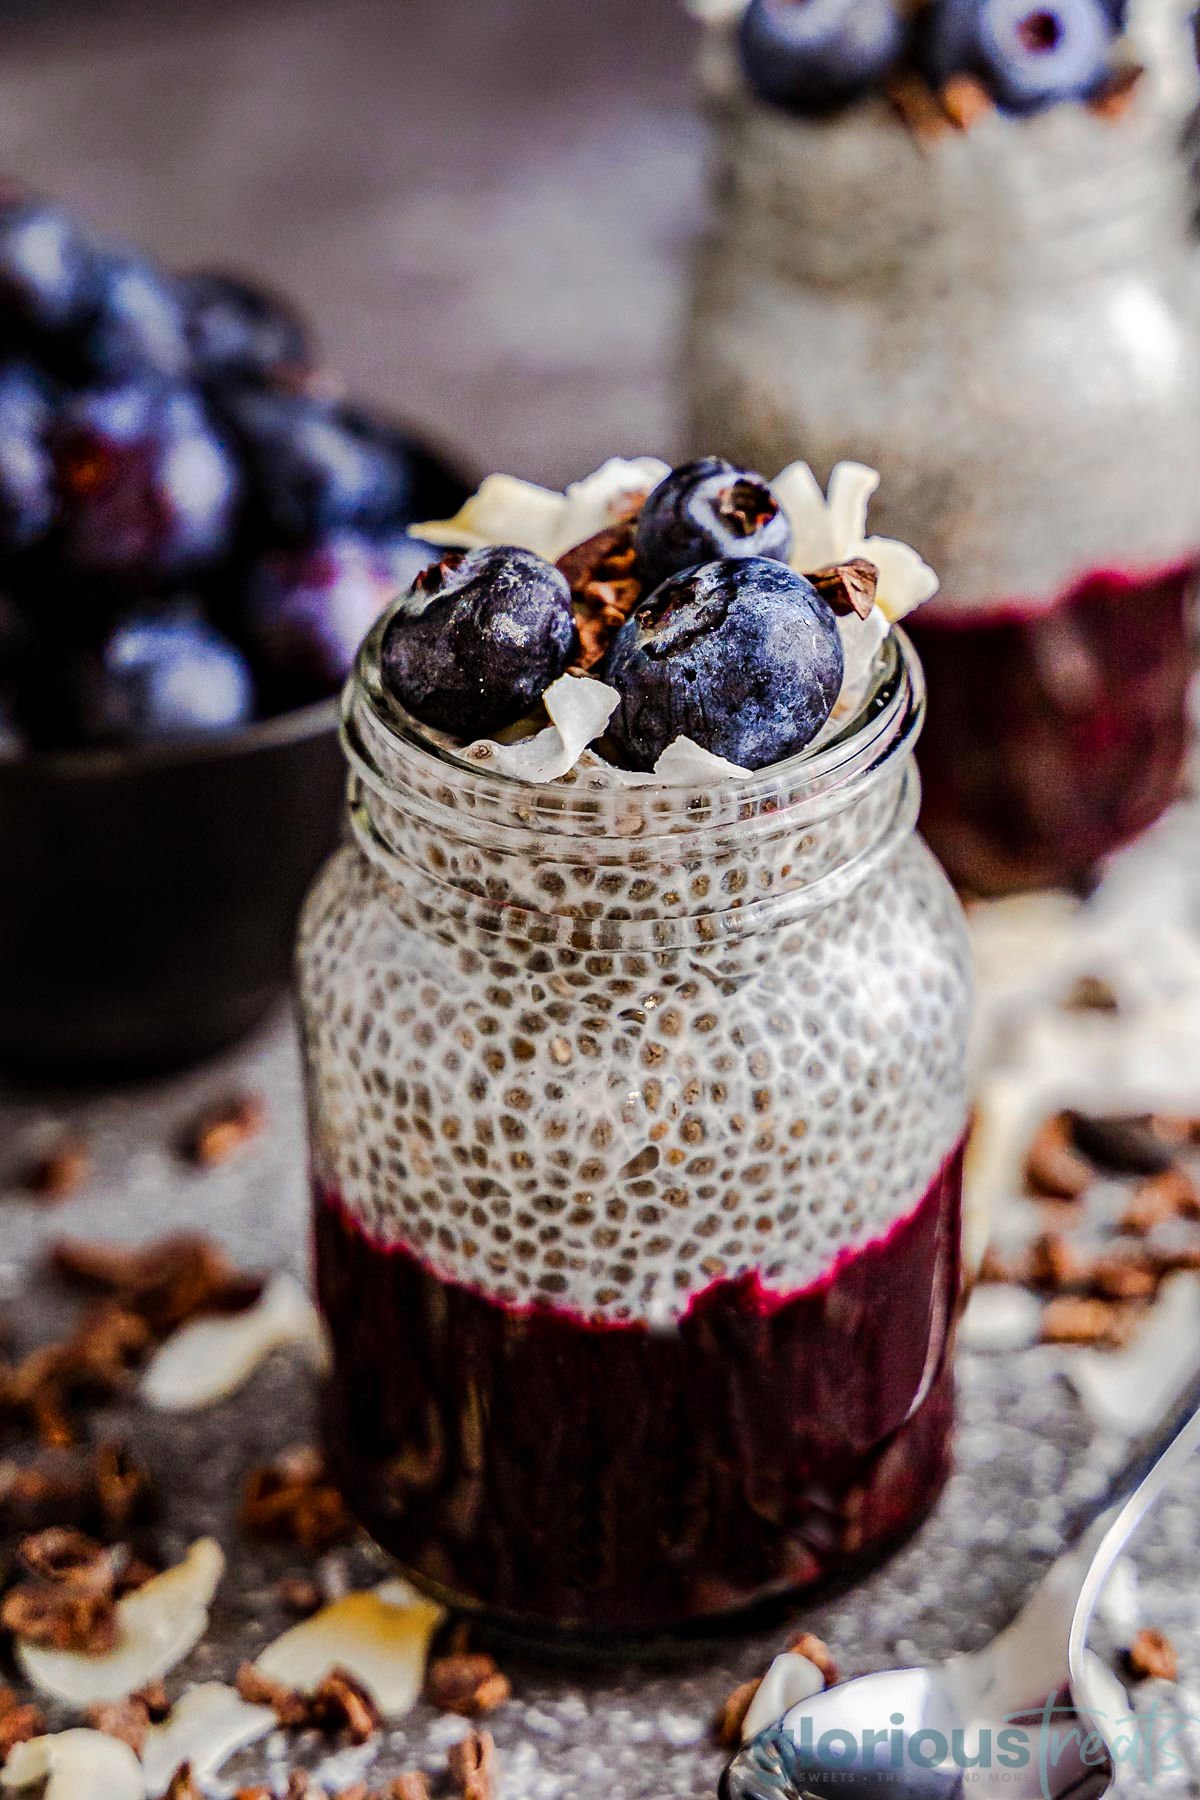 angled top down look at mason jar with blueberry compote and chia seed pudding garnished with blueberries and coconut. bowl of blueberries and another pudding can be seen in the background. a small spoon is next to the jar.